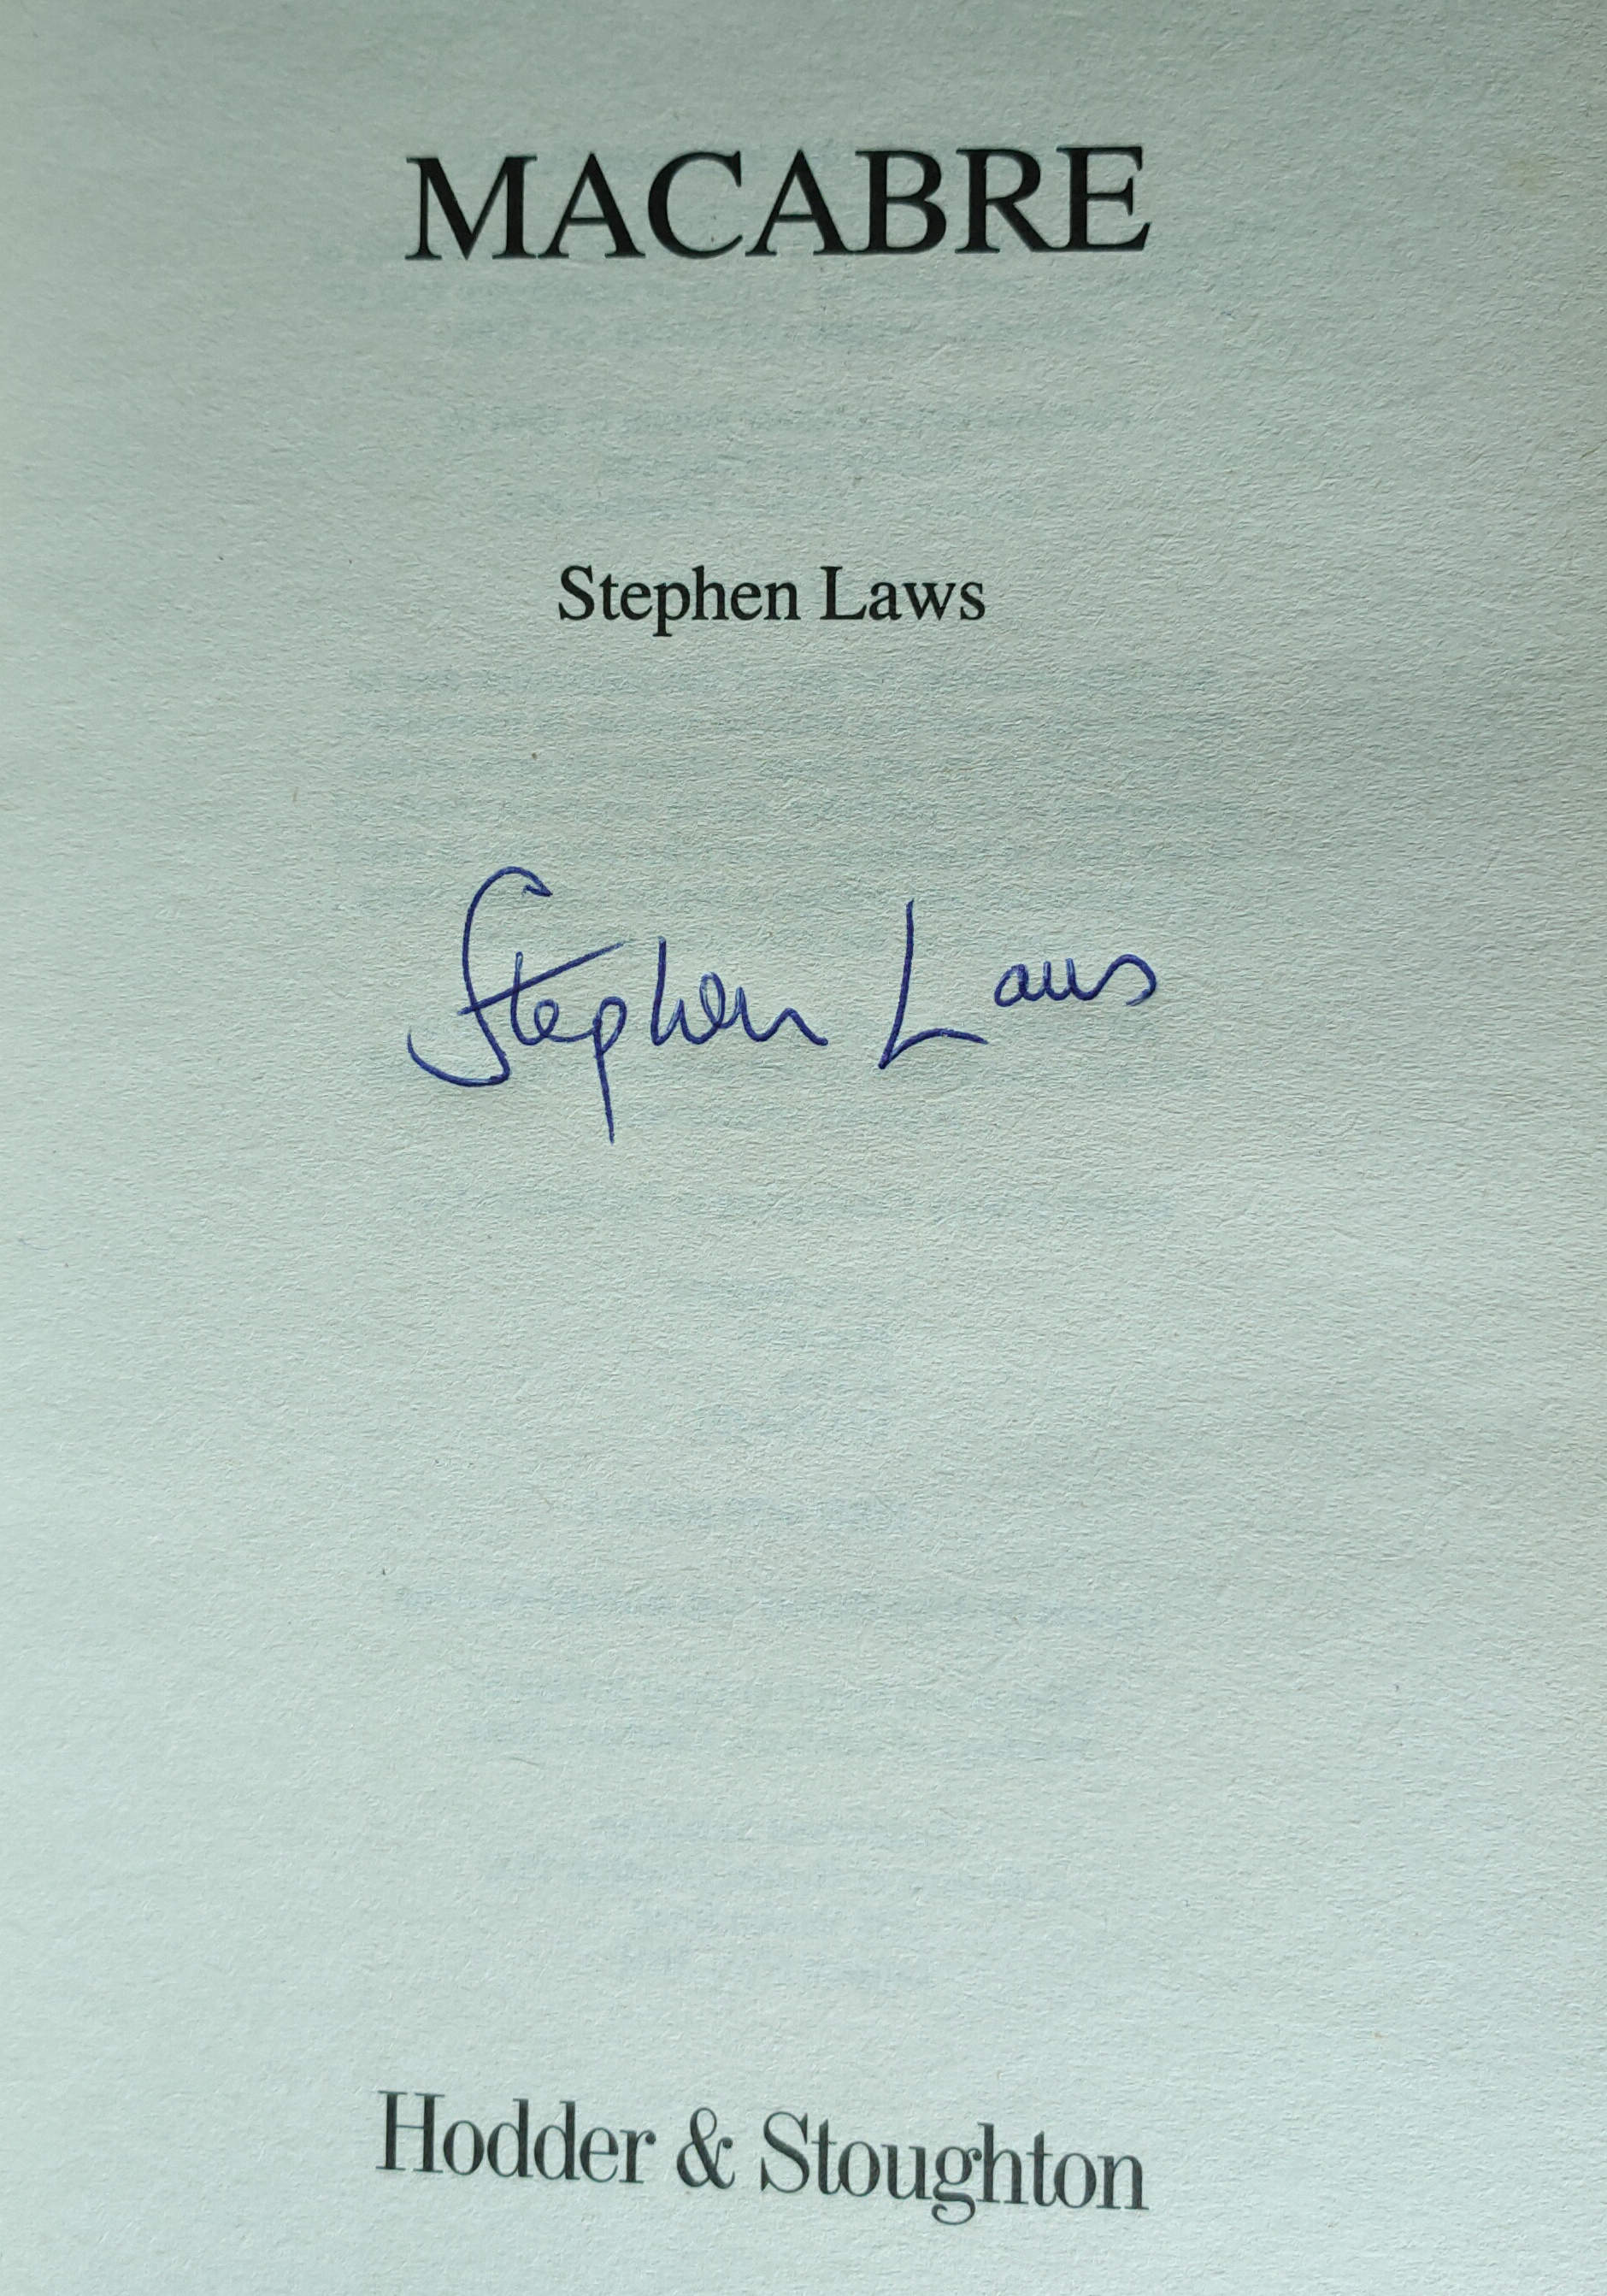 Macabre Signed UK First Edition